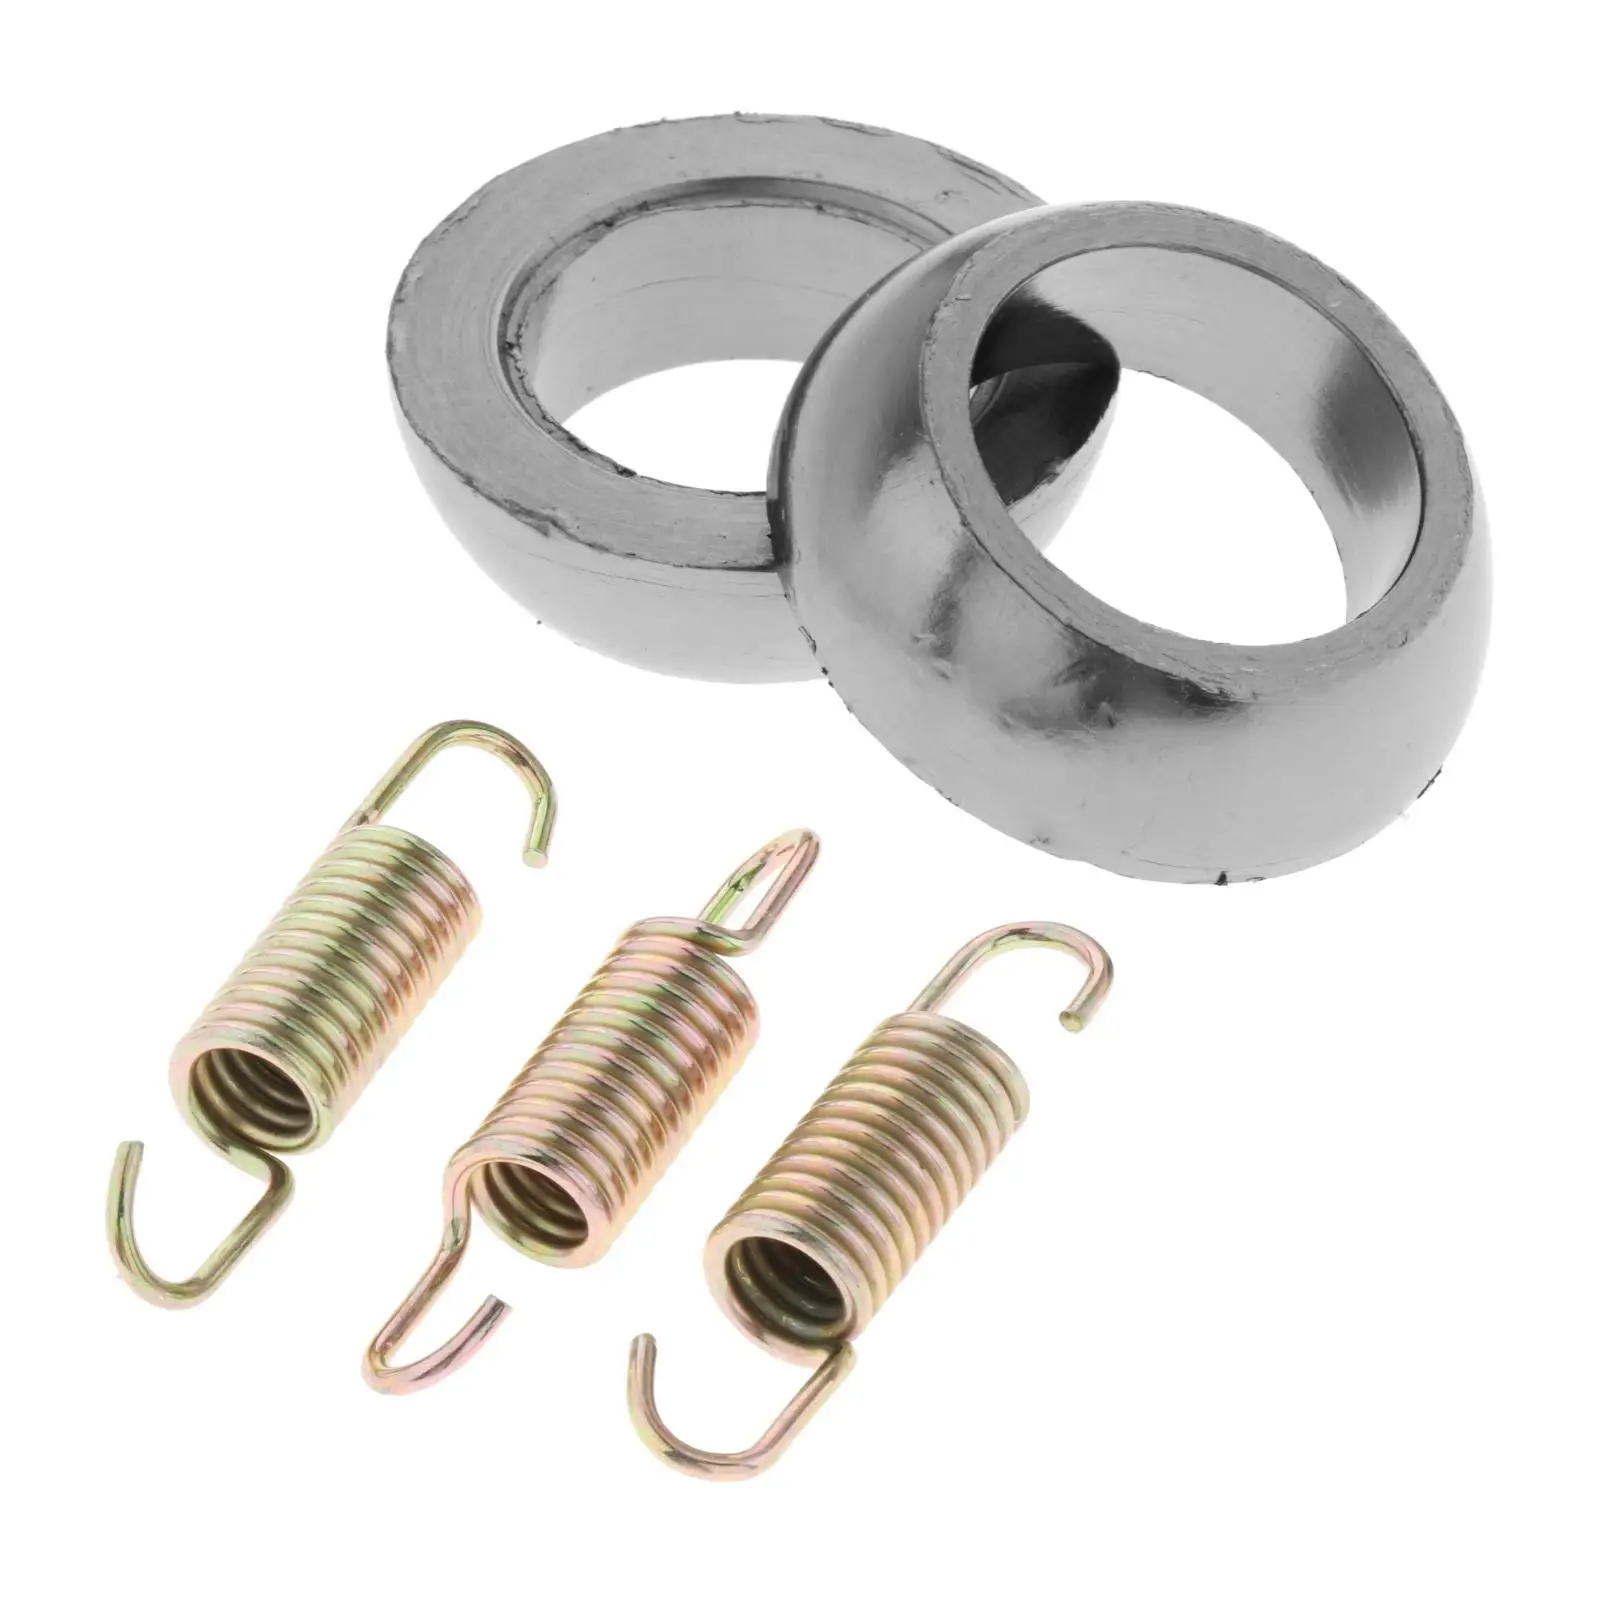 Exhaust Pipe Springs (3) + Gasket Kit Accessories for Arctic Cat 300